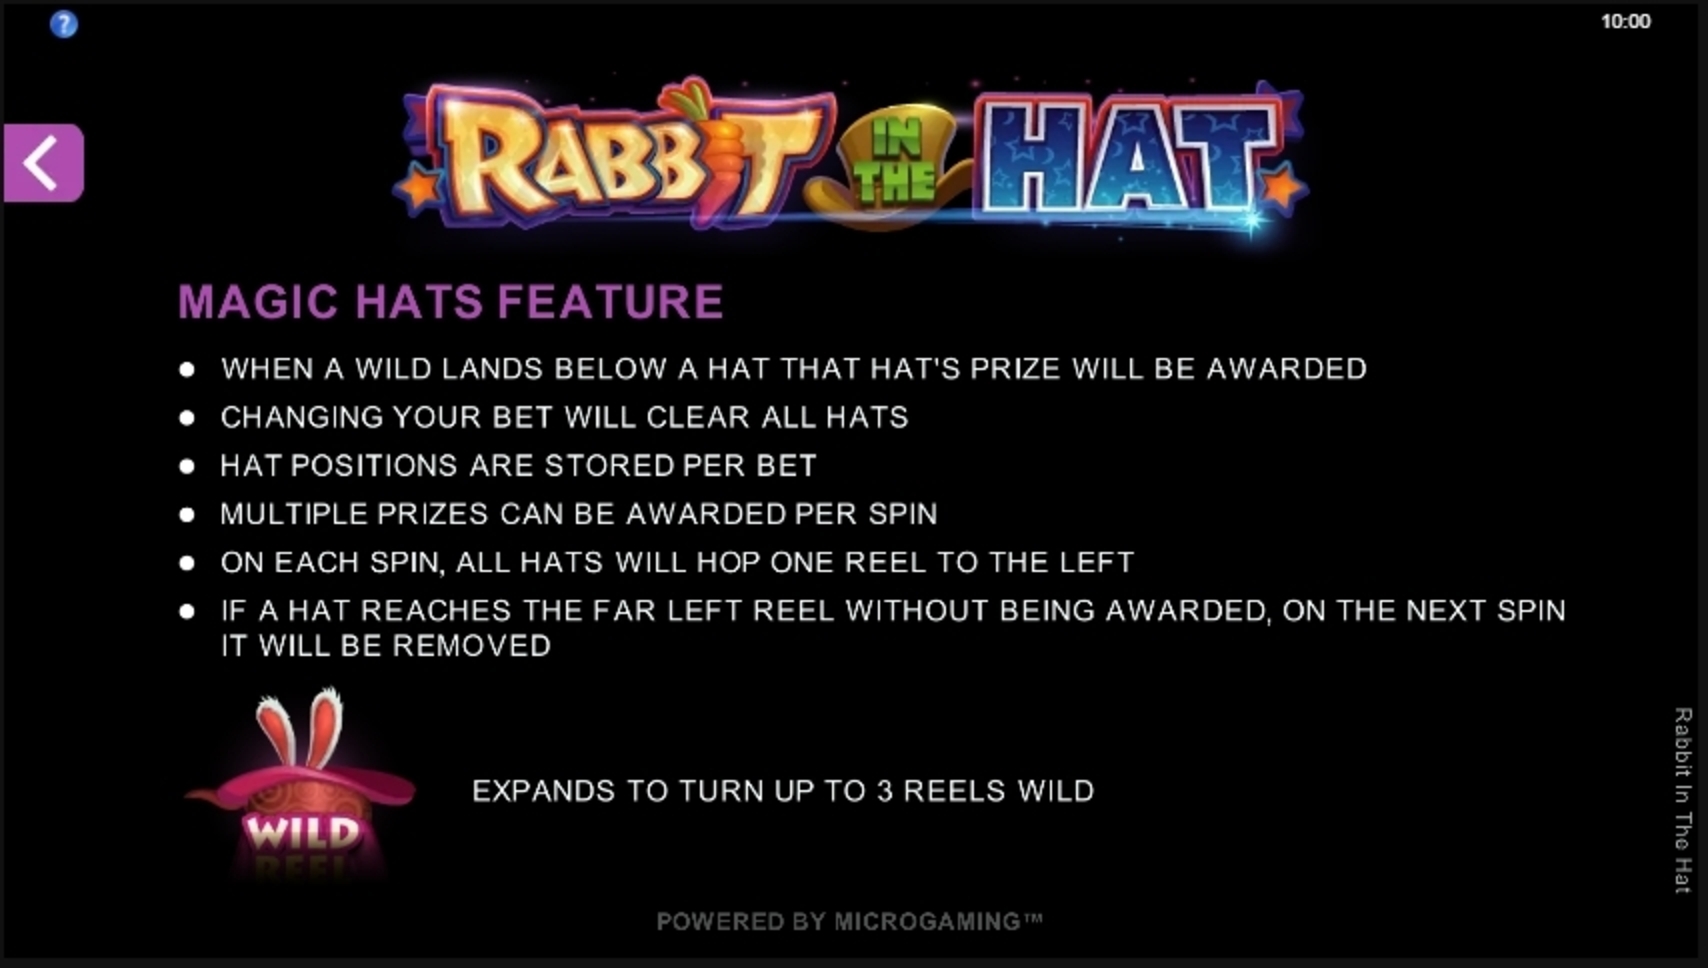 Info of Rabbit In The Hat Slot Game by Microgaming